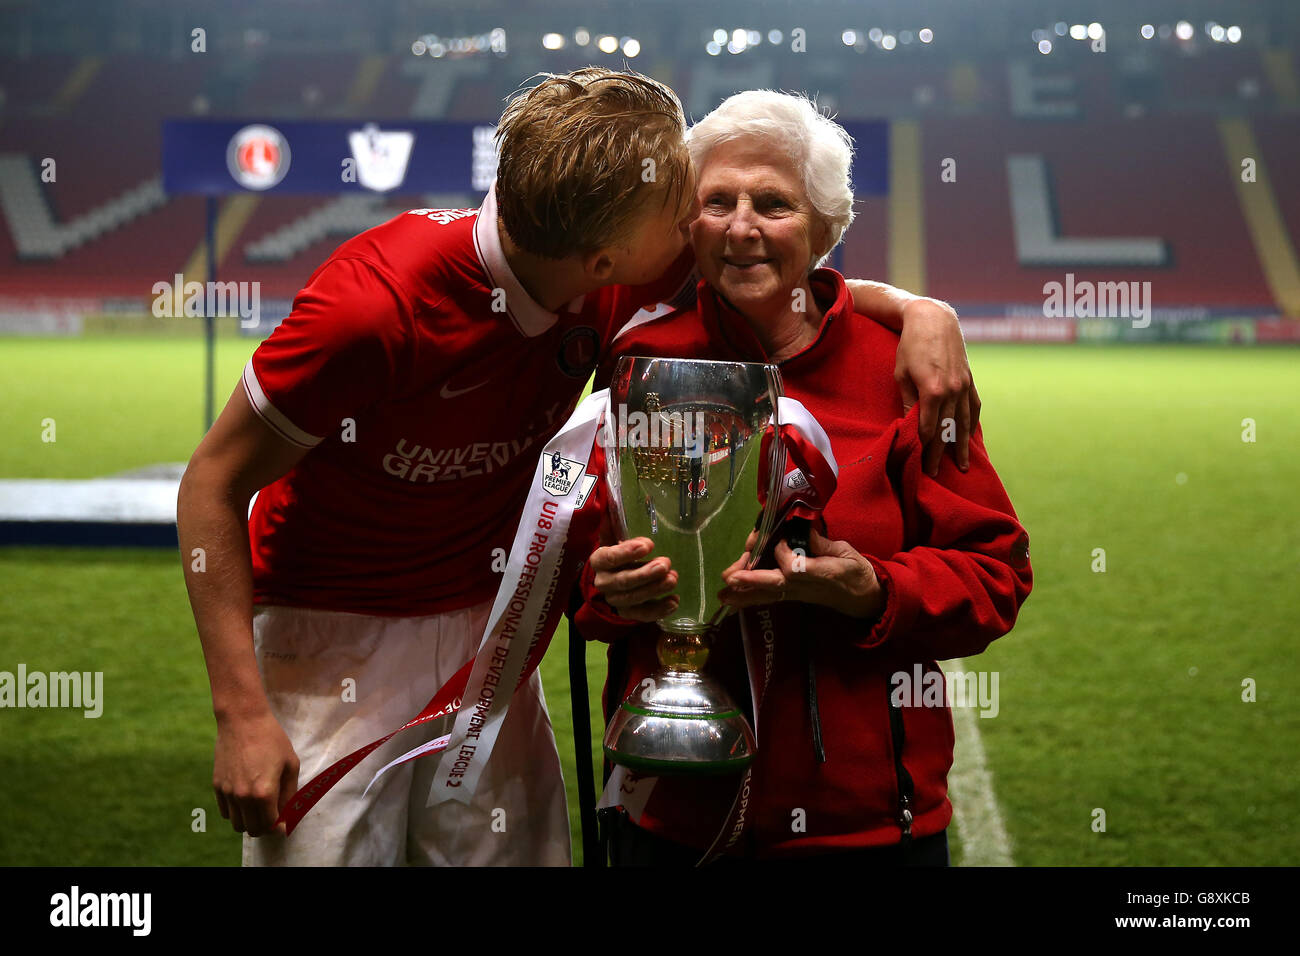 Charlton Athletic's George Lapslie with the U18 Professional Development League 2 trophy Stock Photo